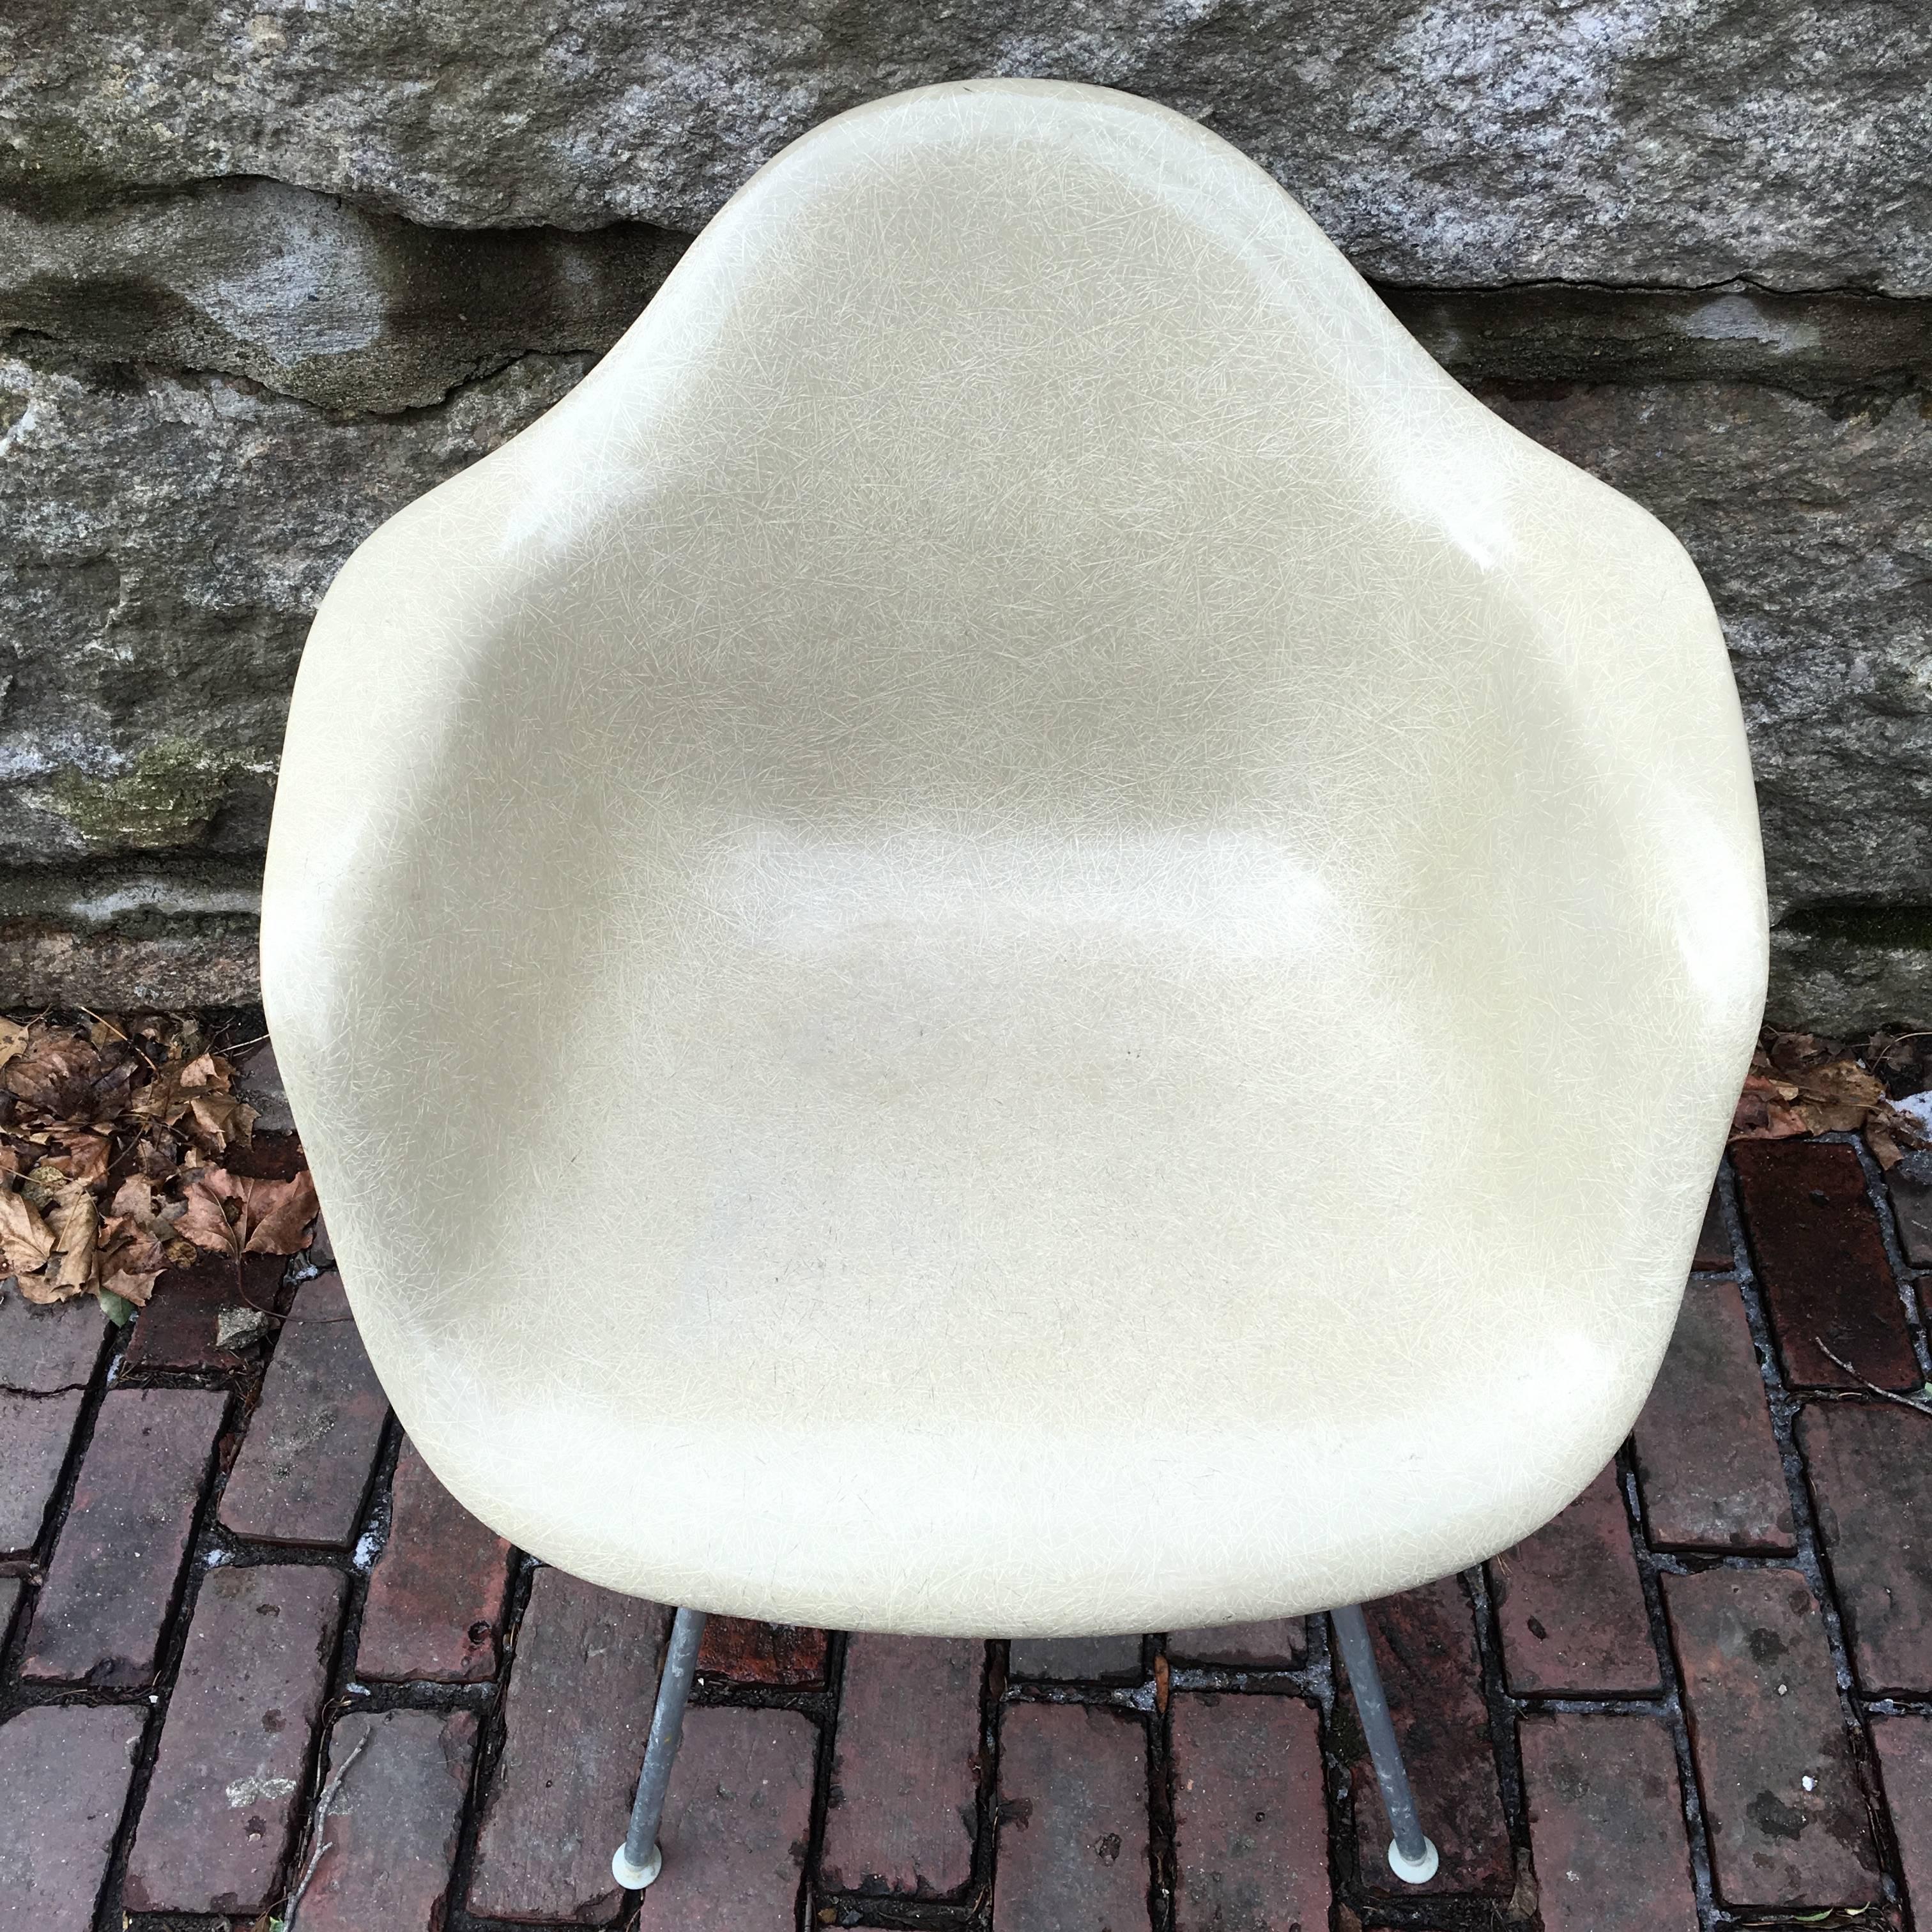 Herman Miller Eames DAX armchair in greige. No fading or cracks. In excellent condition with original base, mounts and screws. Early Herman Miller shell with incredibly rich visible fibers.